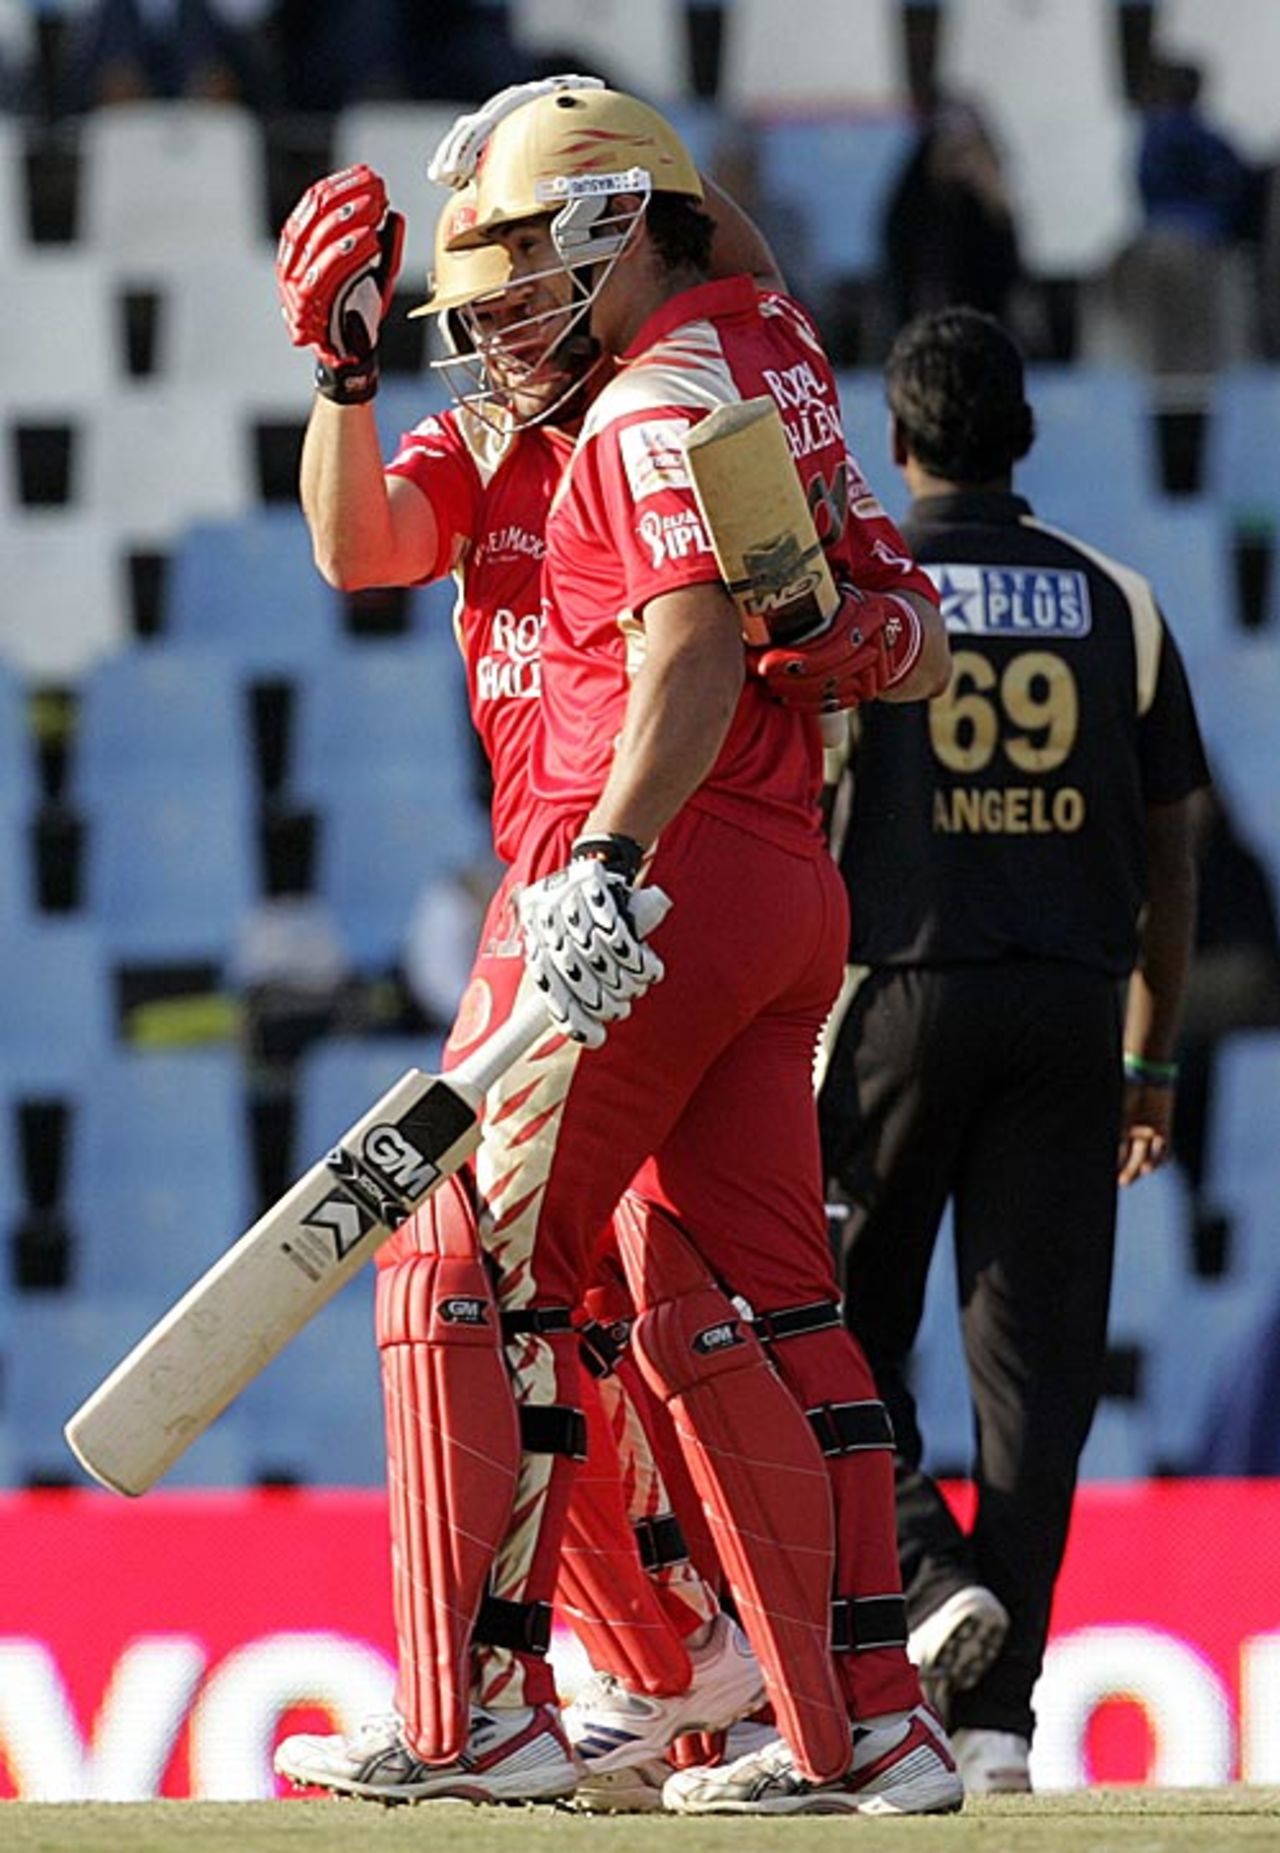 Ross Taylor and Mark Boucher embrace after sealing a tense six-wicket win, Kolkata Knight Riders v Royal Challengers Bangalore, IPL, Centurion, May 12, 2009